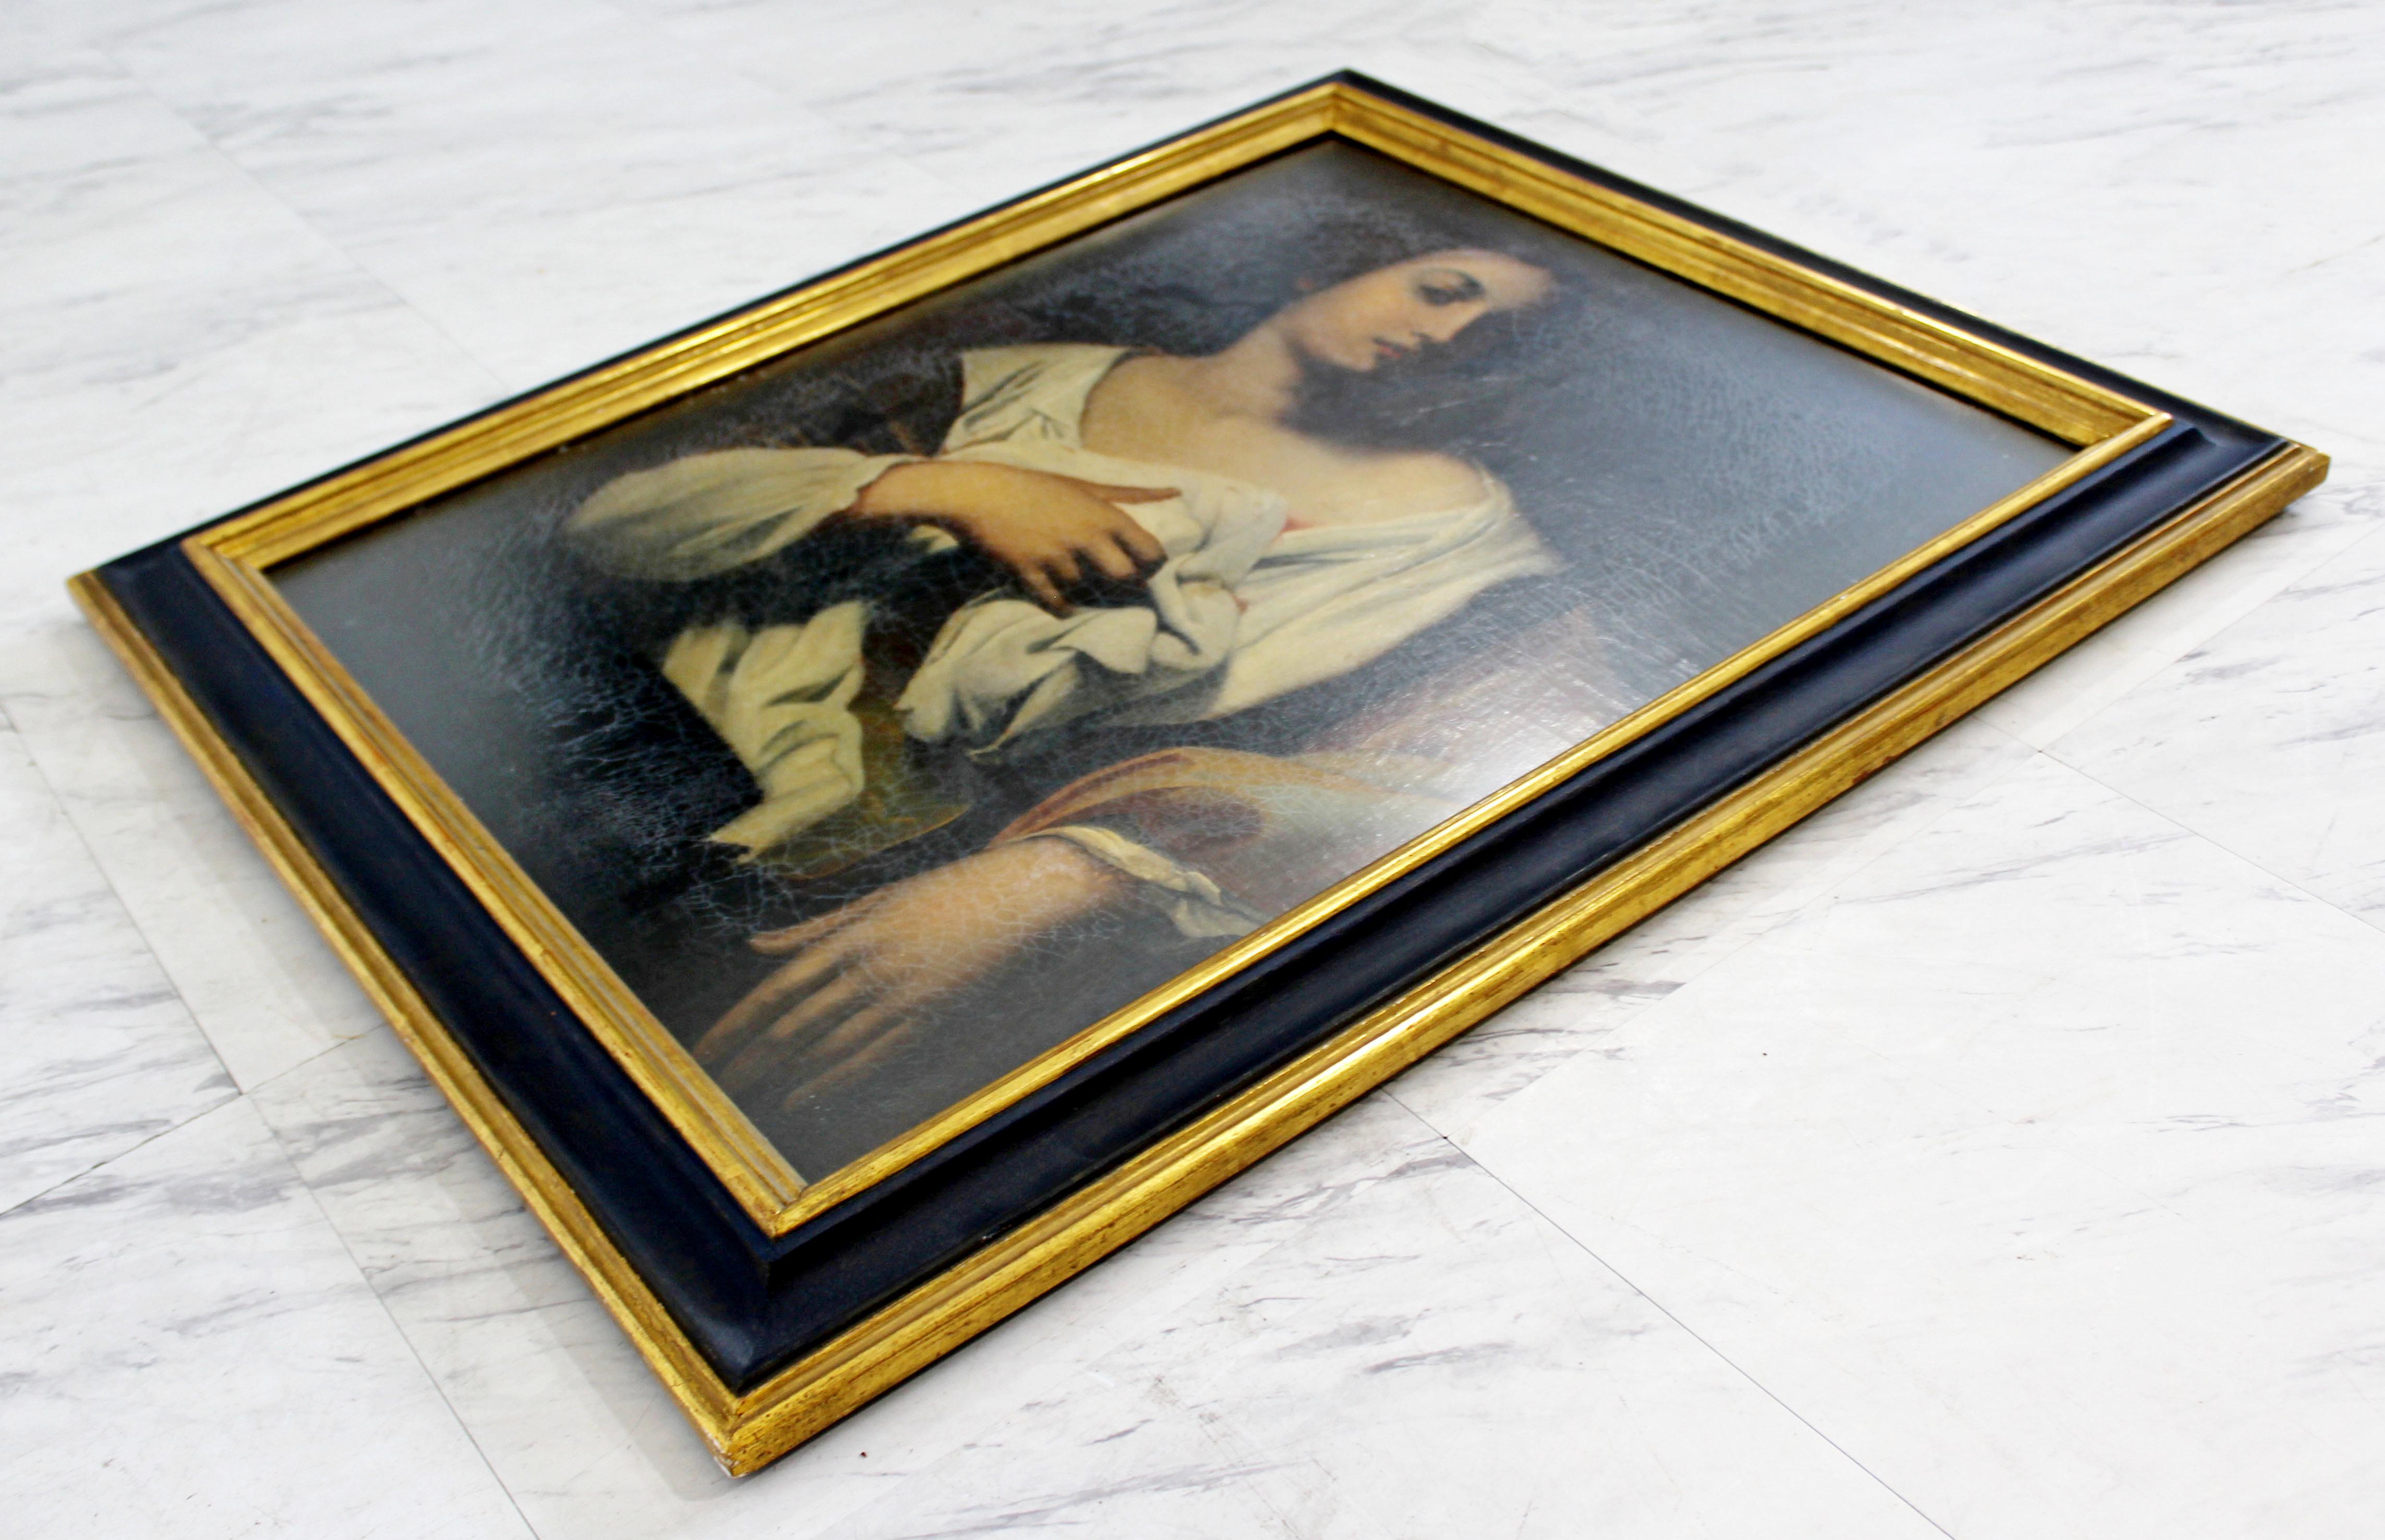 Unknown Antique Framed St. Agnes the Martyr Oil Painting 14th or 15th Century Portrait